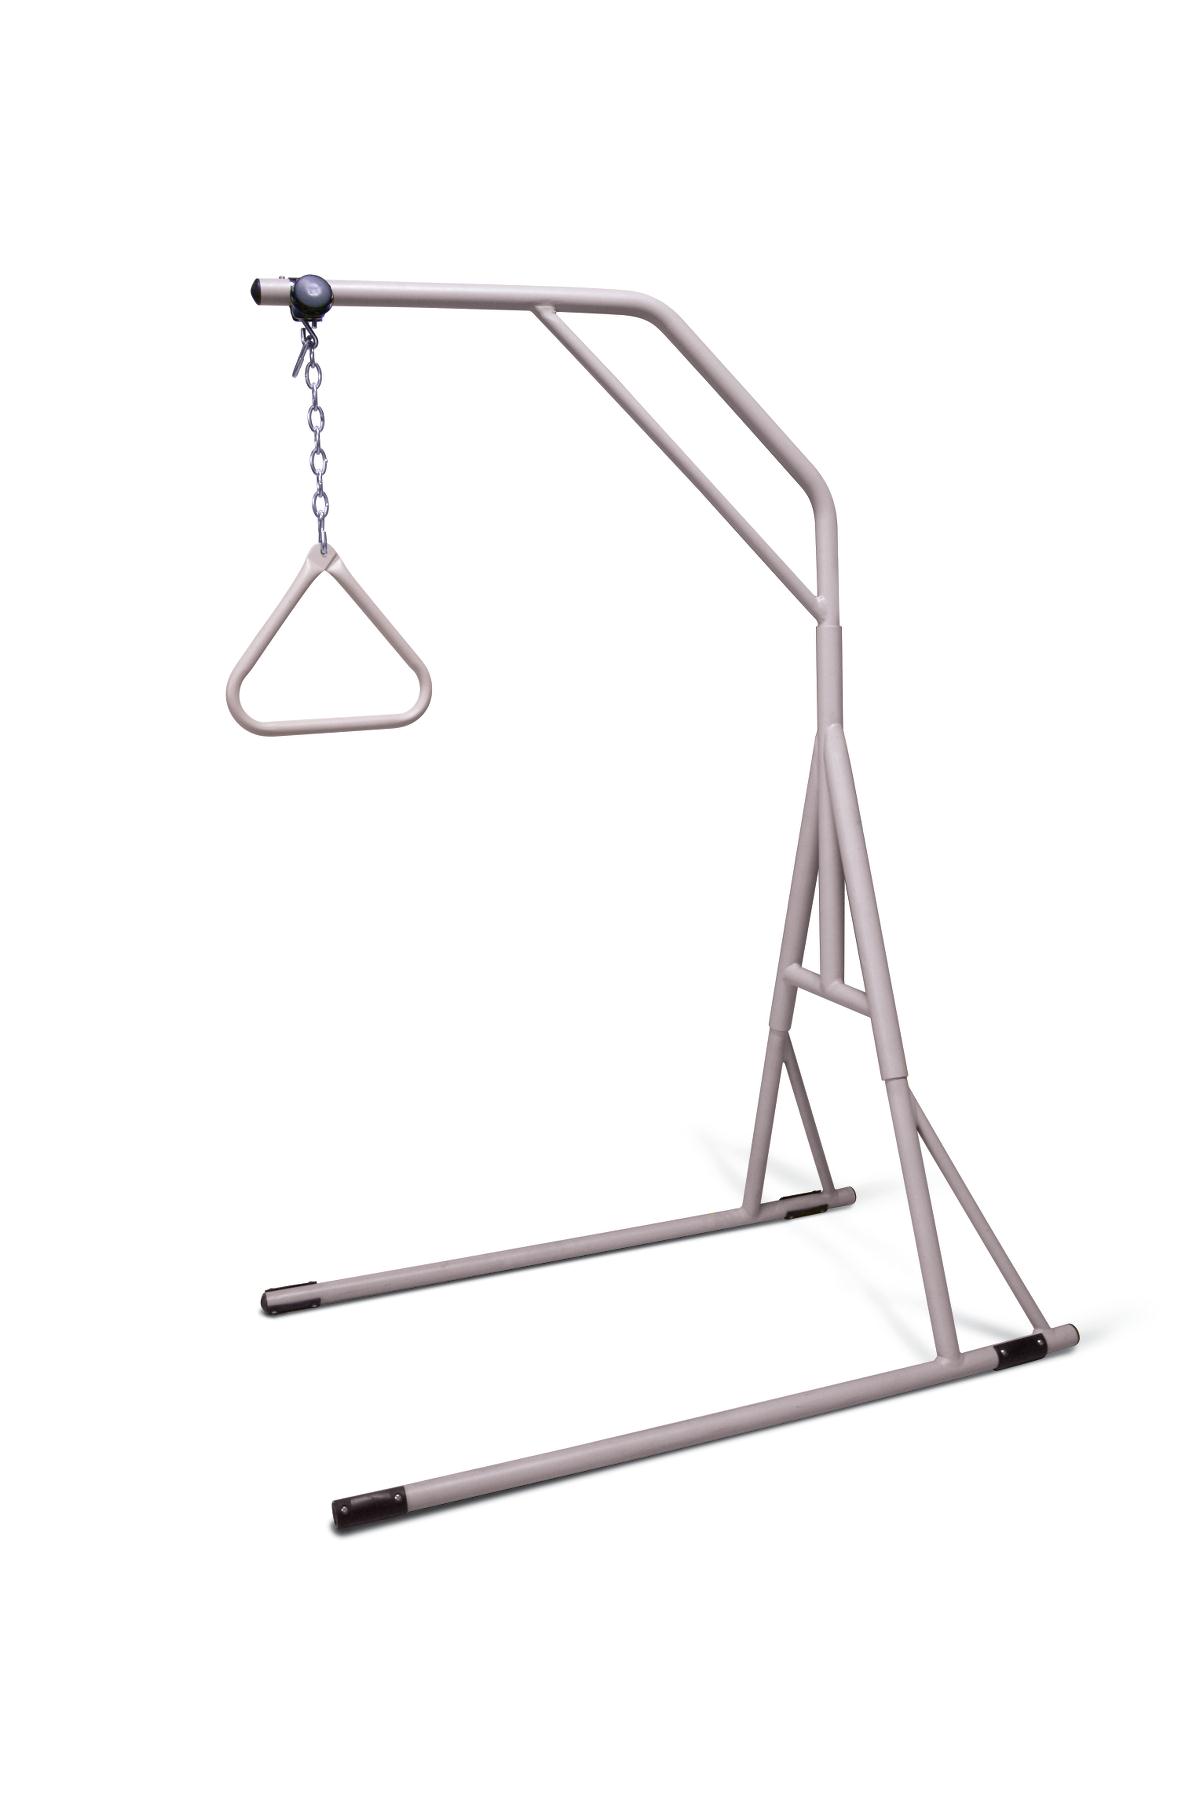 Bariatric Trapeze with Base, 500 lb. Weight Capacity, Each